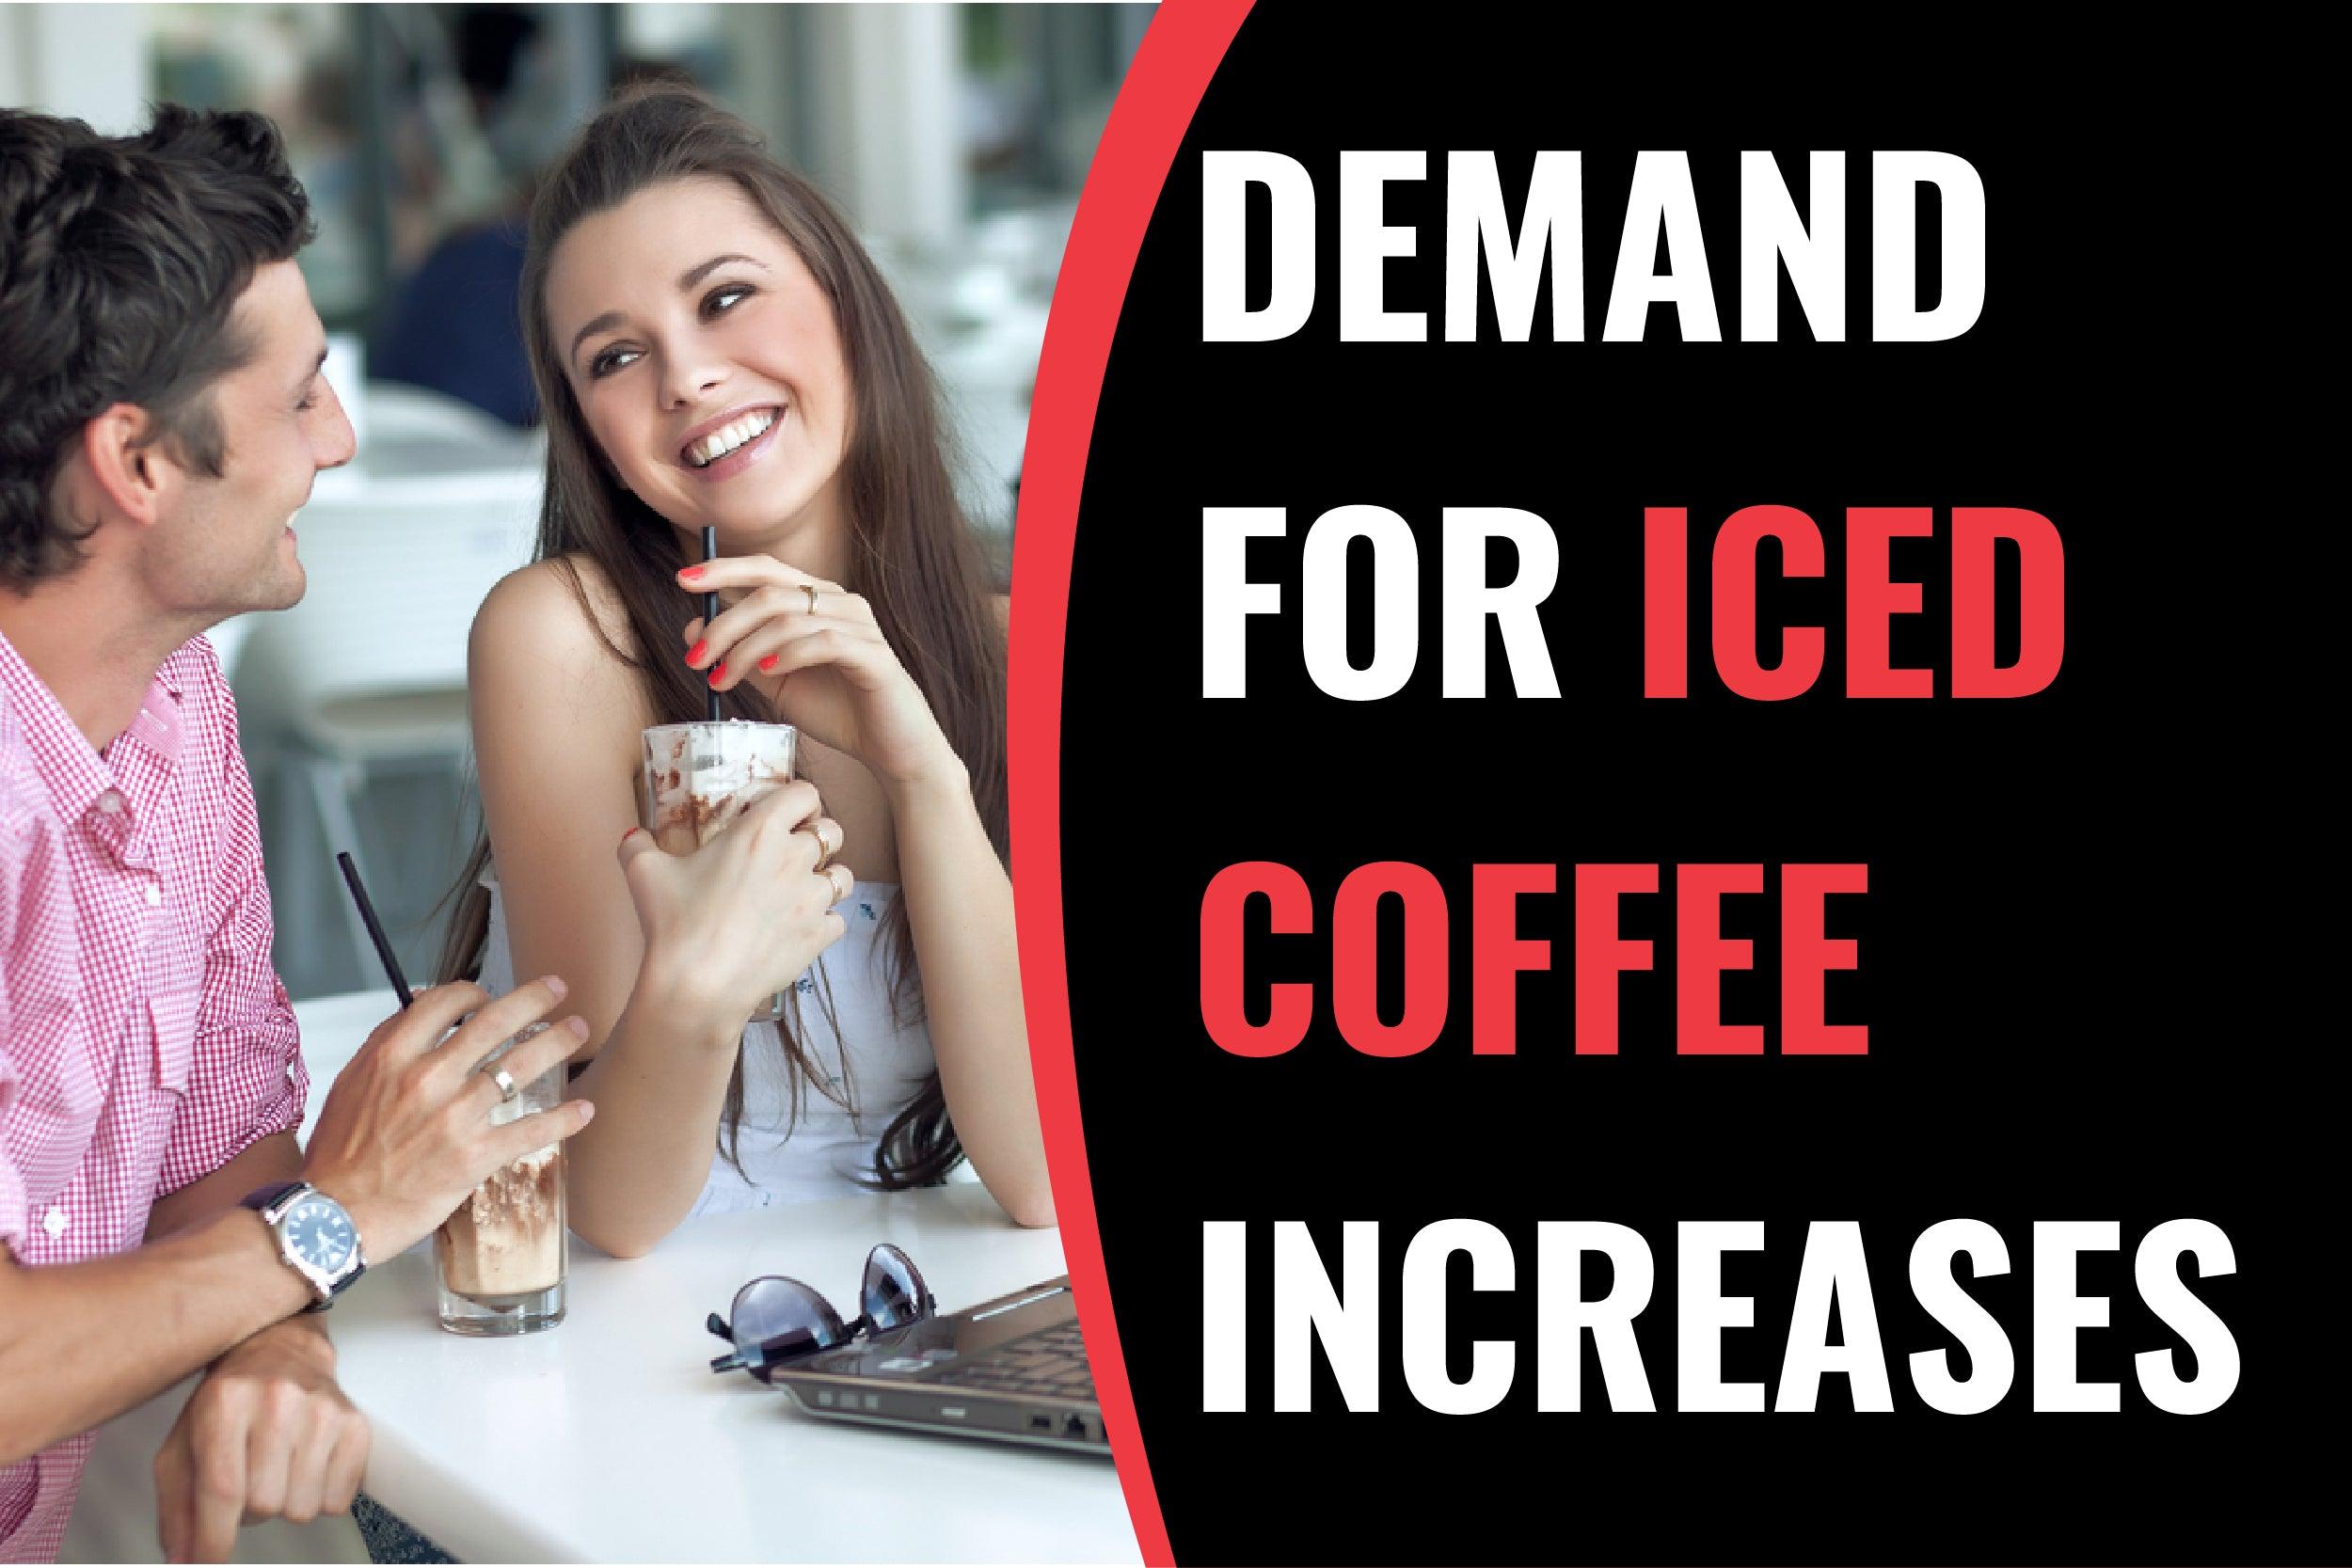 Hot Beverage Vending: Demand for Iced Coffee Increases - Vendnet